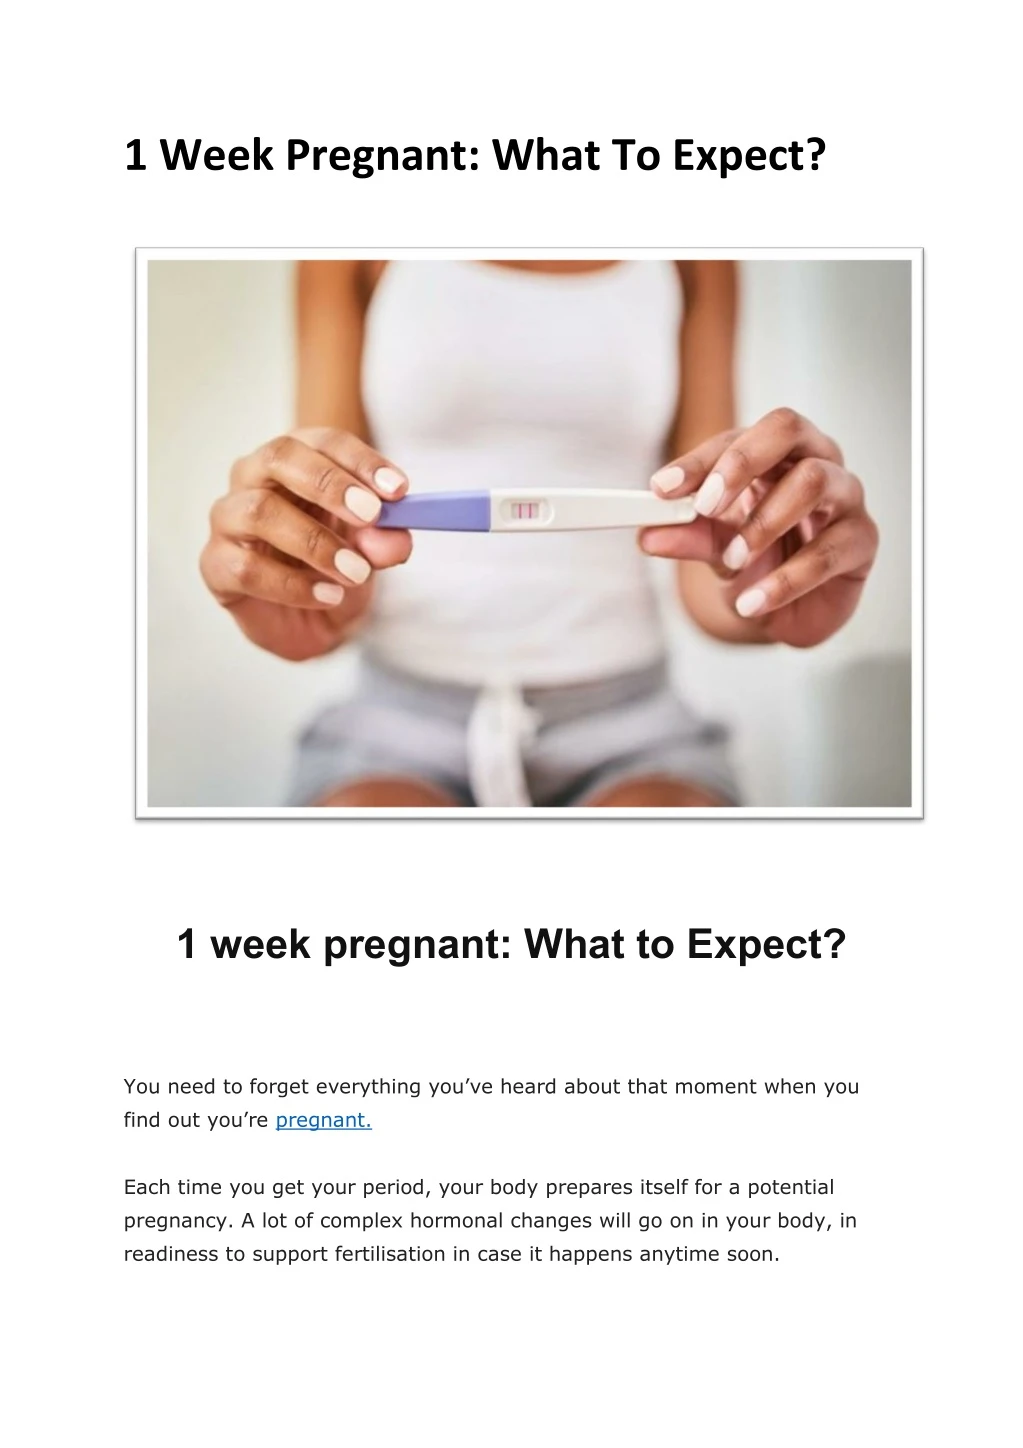 1 week pregnant what to expect